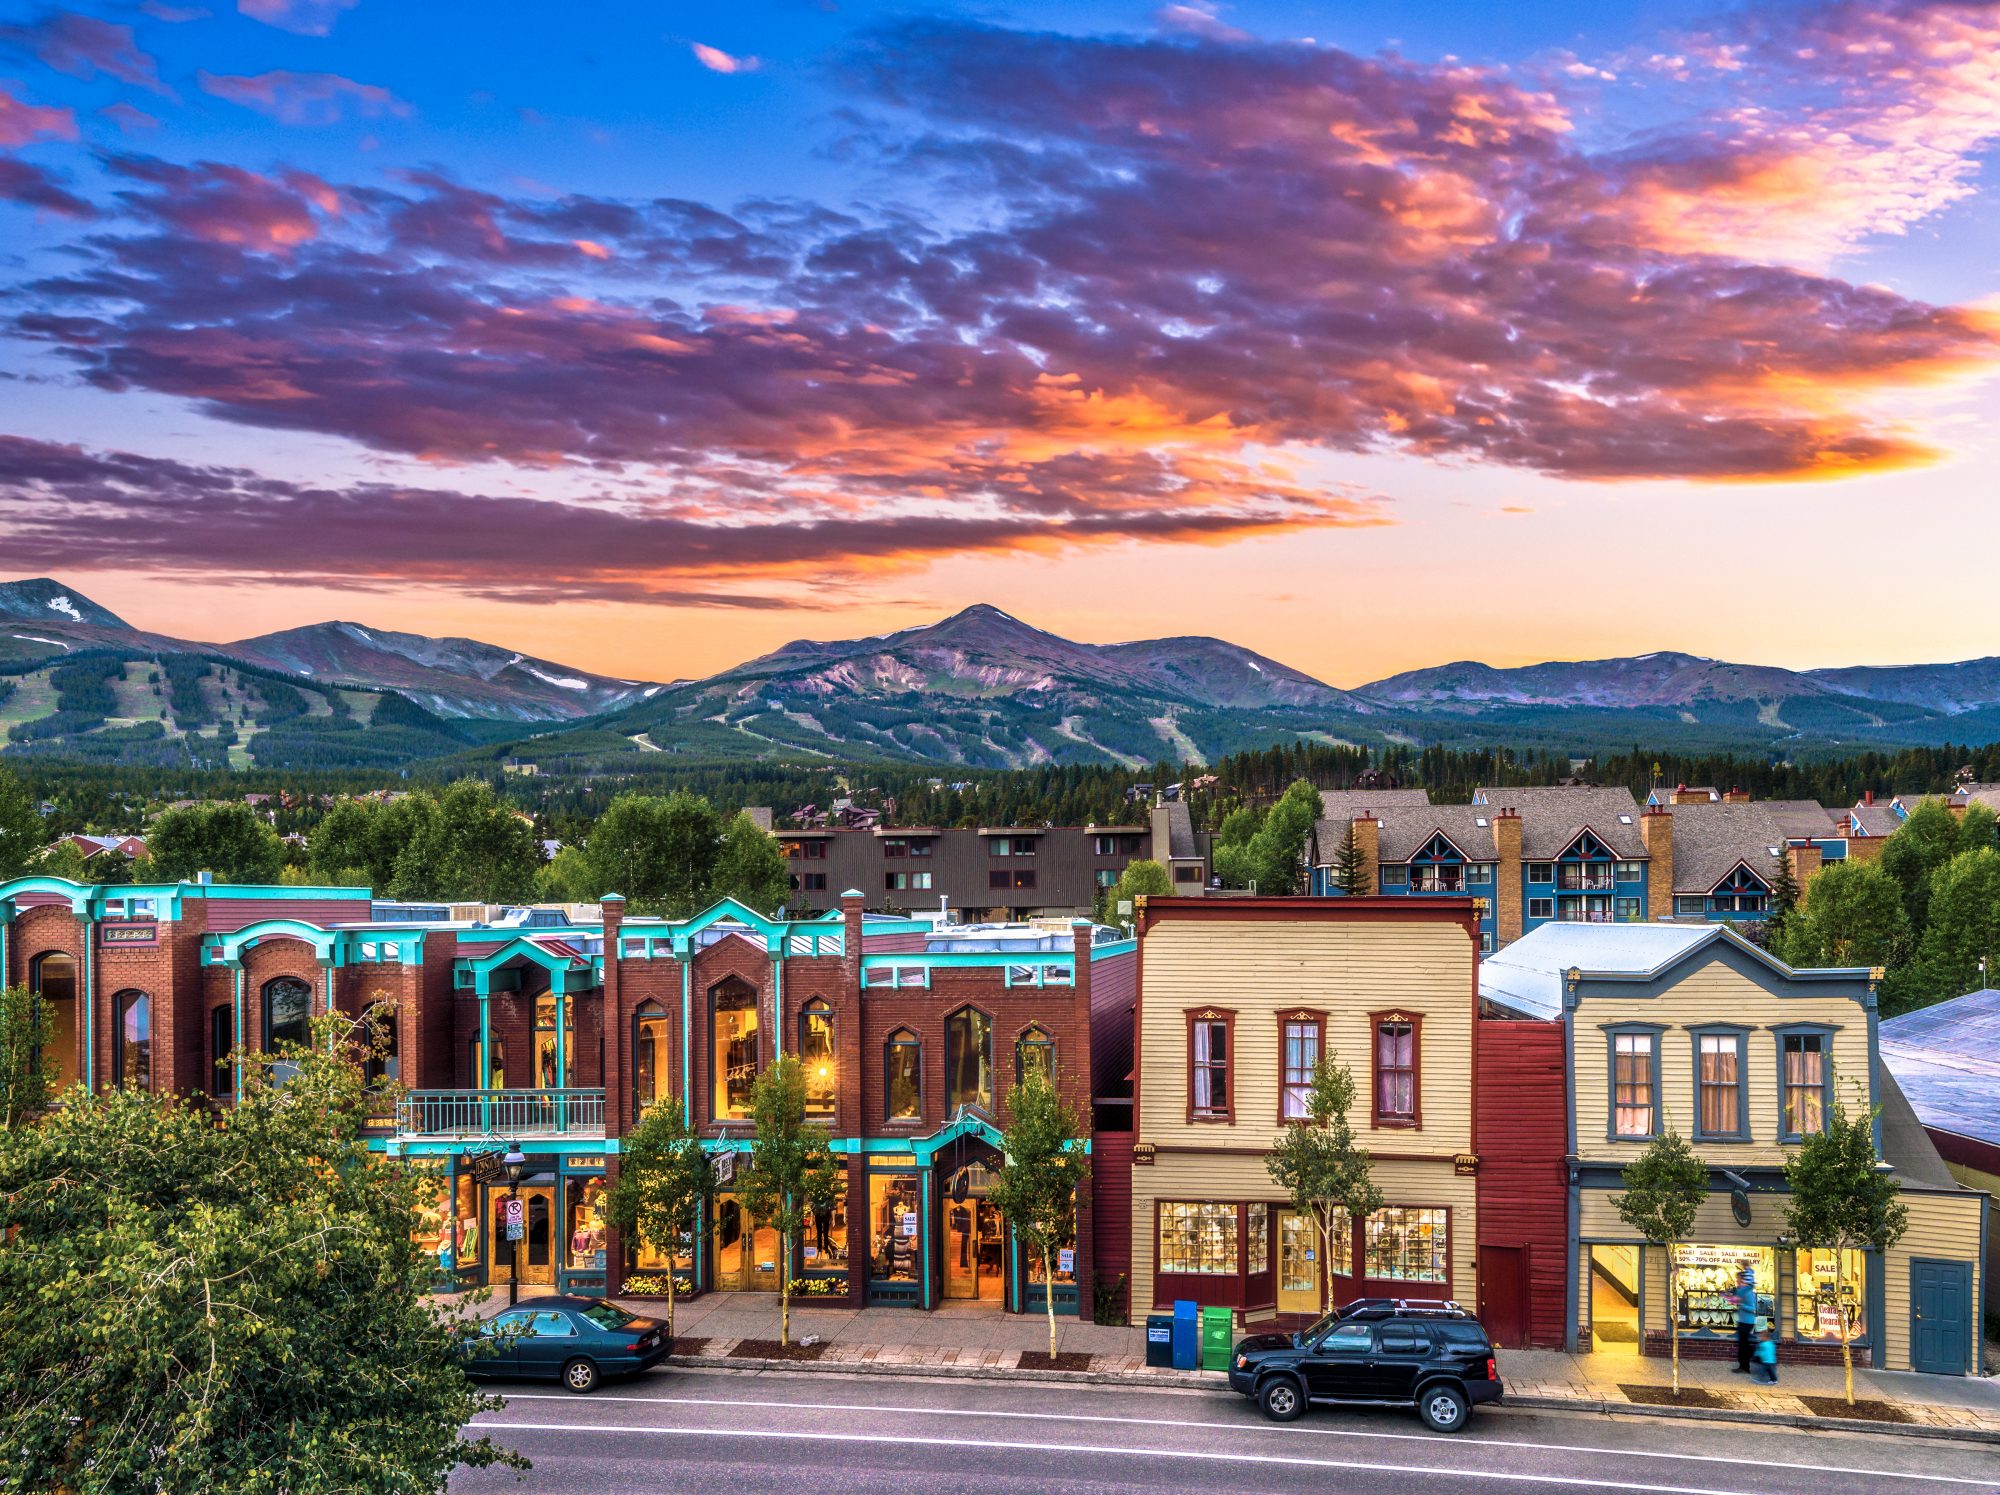 Town at Sunset in Breckenridge, CO. Photo: Jeff Andrew. Vail Resorts. Vail Resorts Ceo Rob Katz Gives $2 Million in Grants to Support Mental & Behavioral Health Programs in Mountain Resort Communities across North America.